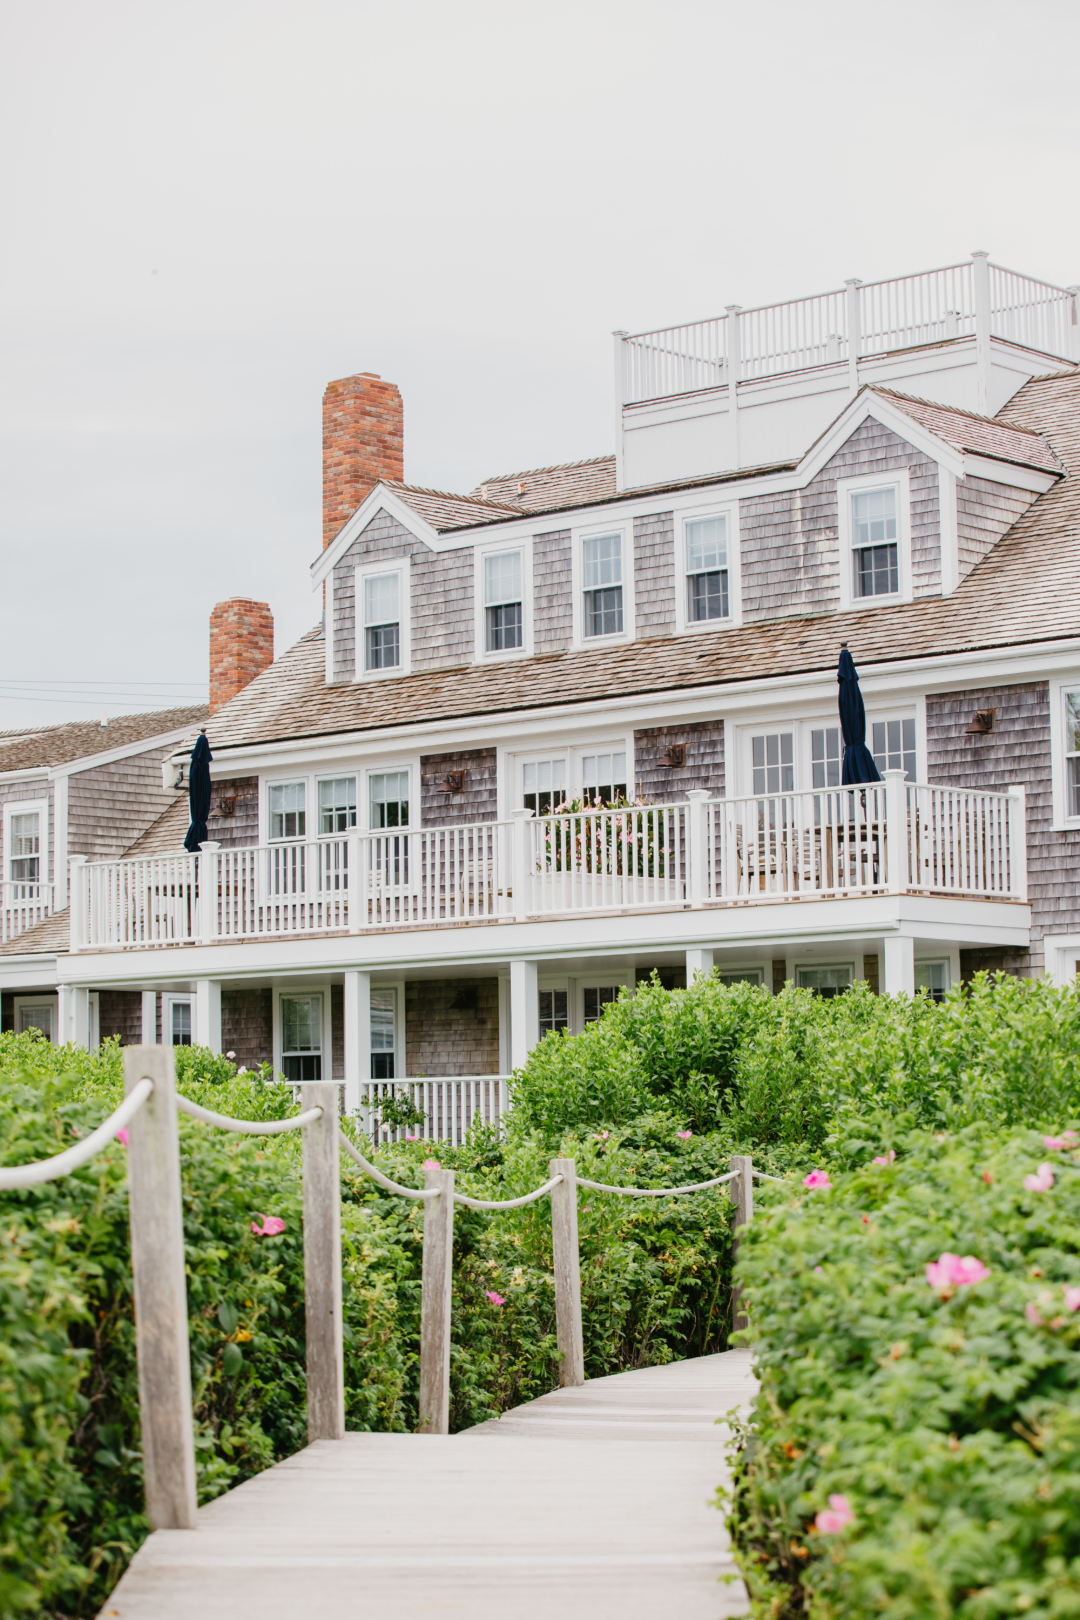 Travel: Harborview Nantucket Picnic with Palm Beach Lately